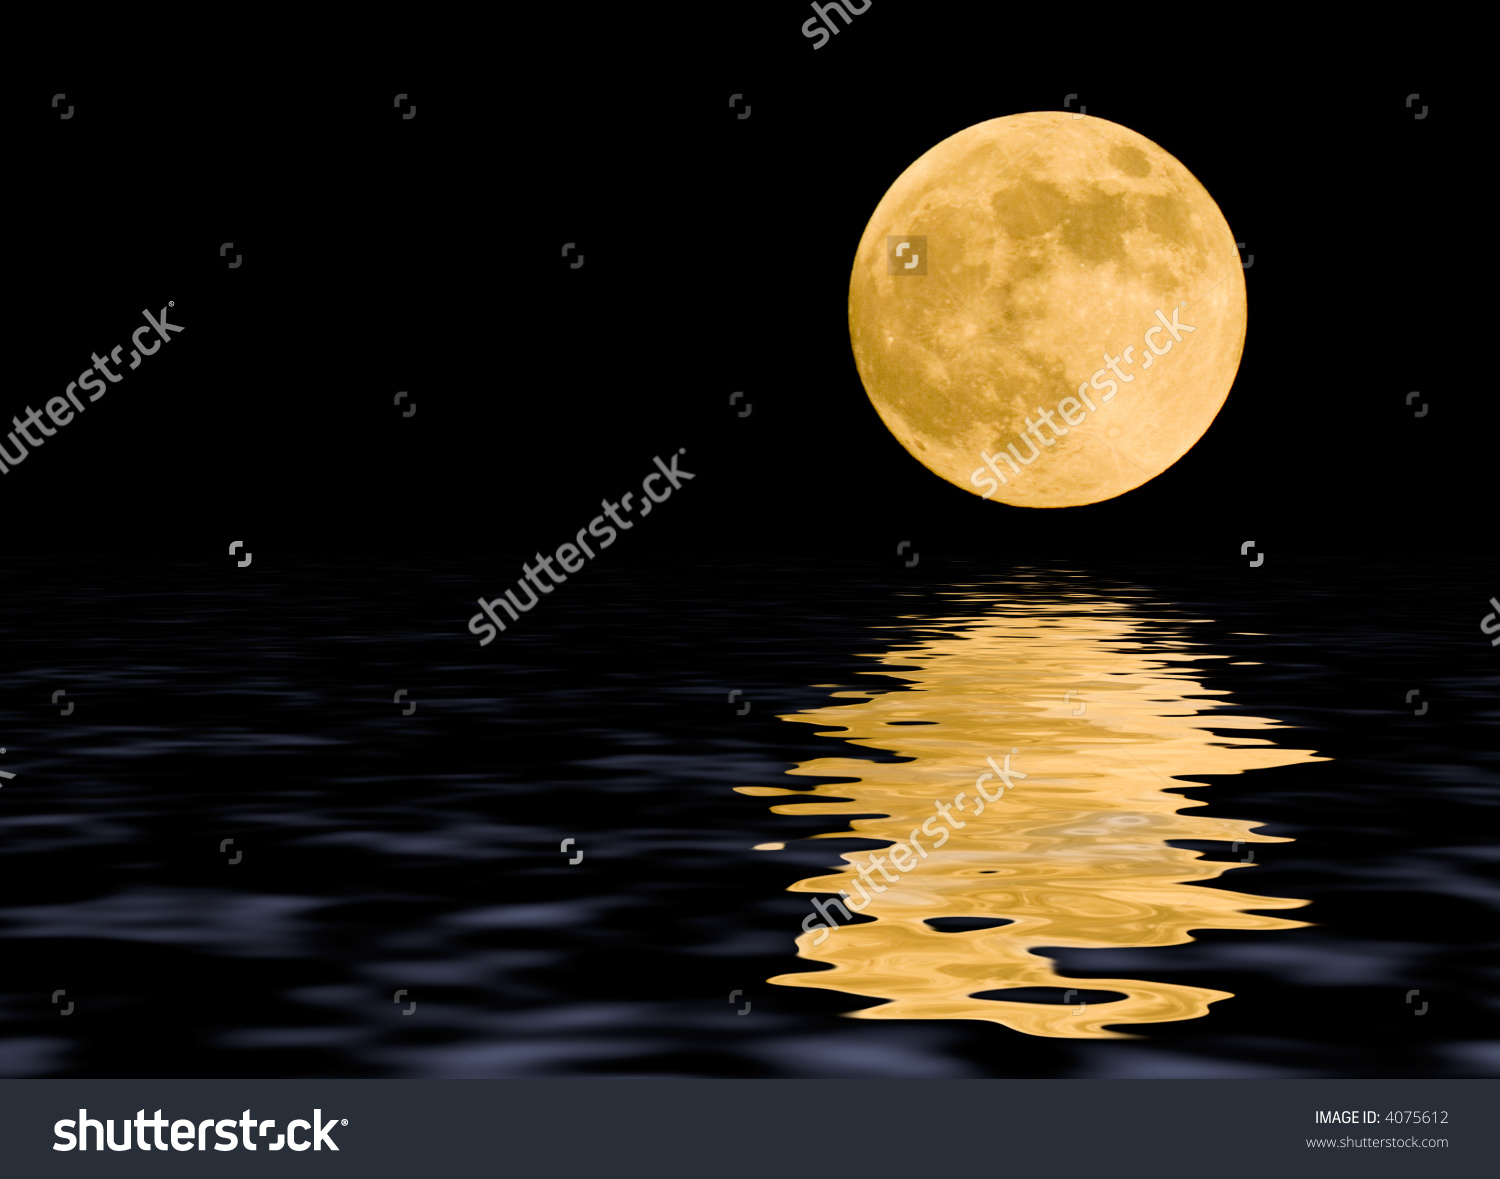 Moon At Midnight With Some Reflections In The Water Stock Photo.